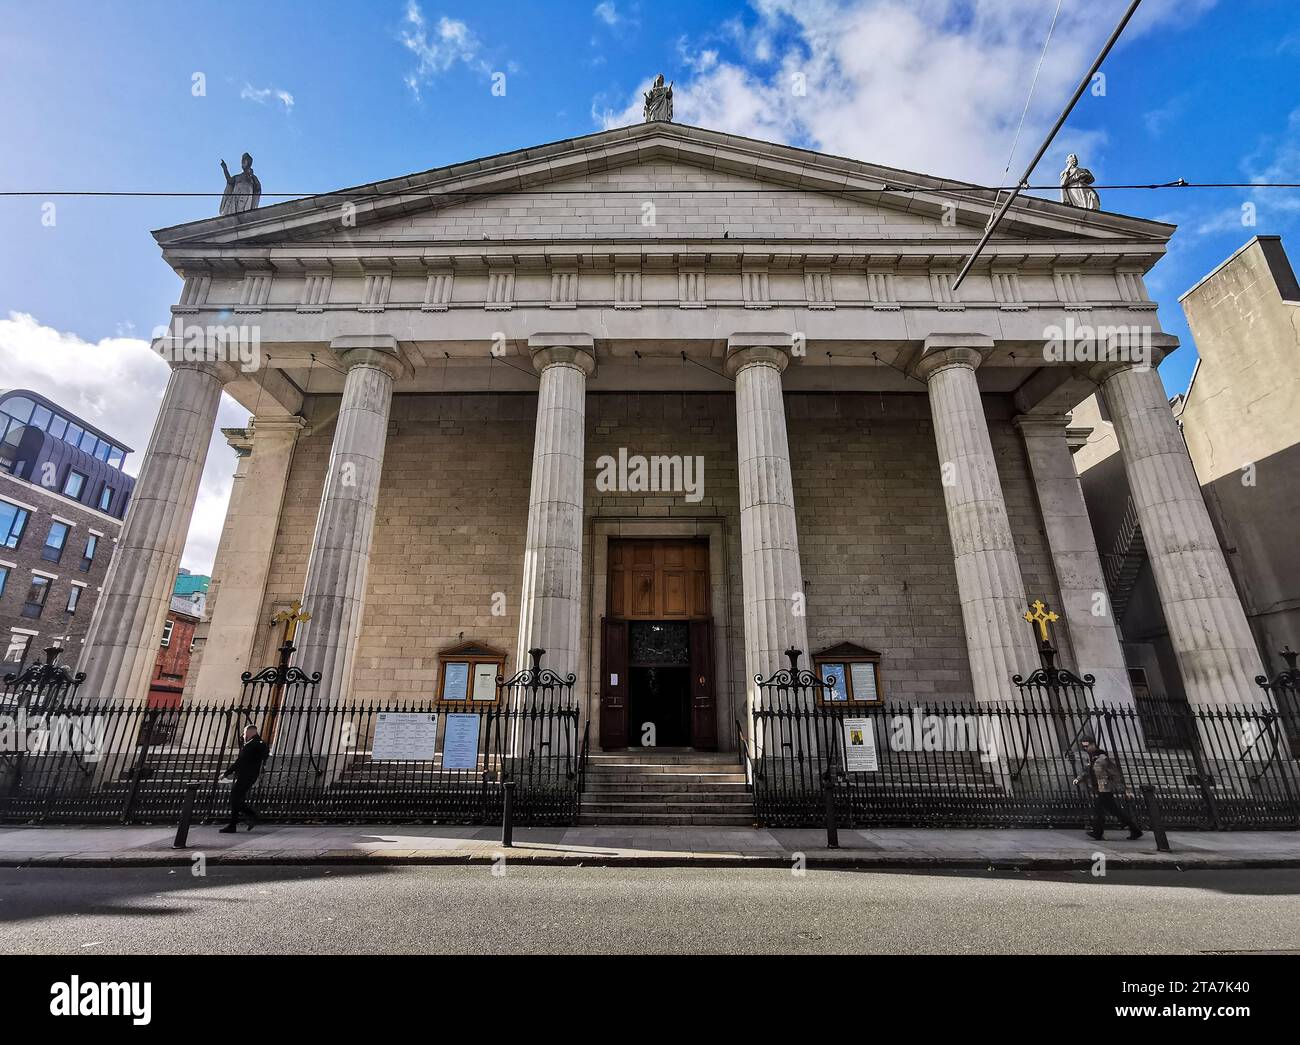 Neoclassical façade of the St Mary's Pro Cathedral, Roman Catholic church in Marlborough Street, with porch and columns, Dublin city center, Ireland Stock Photo